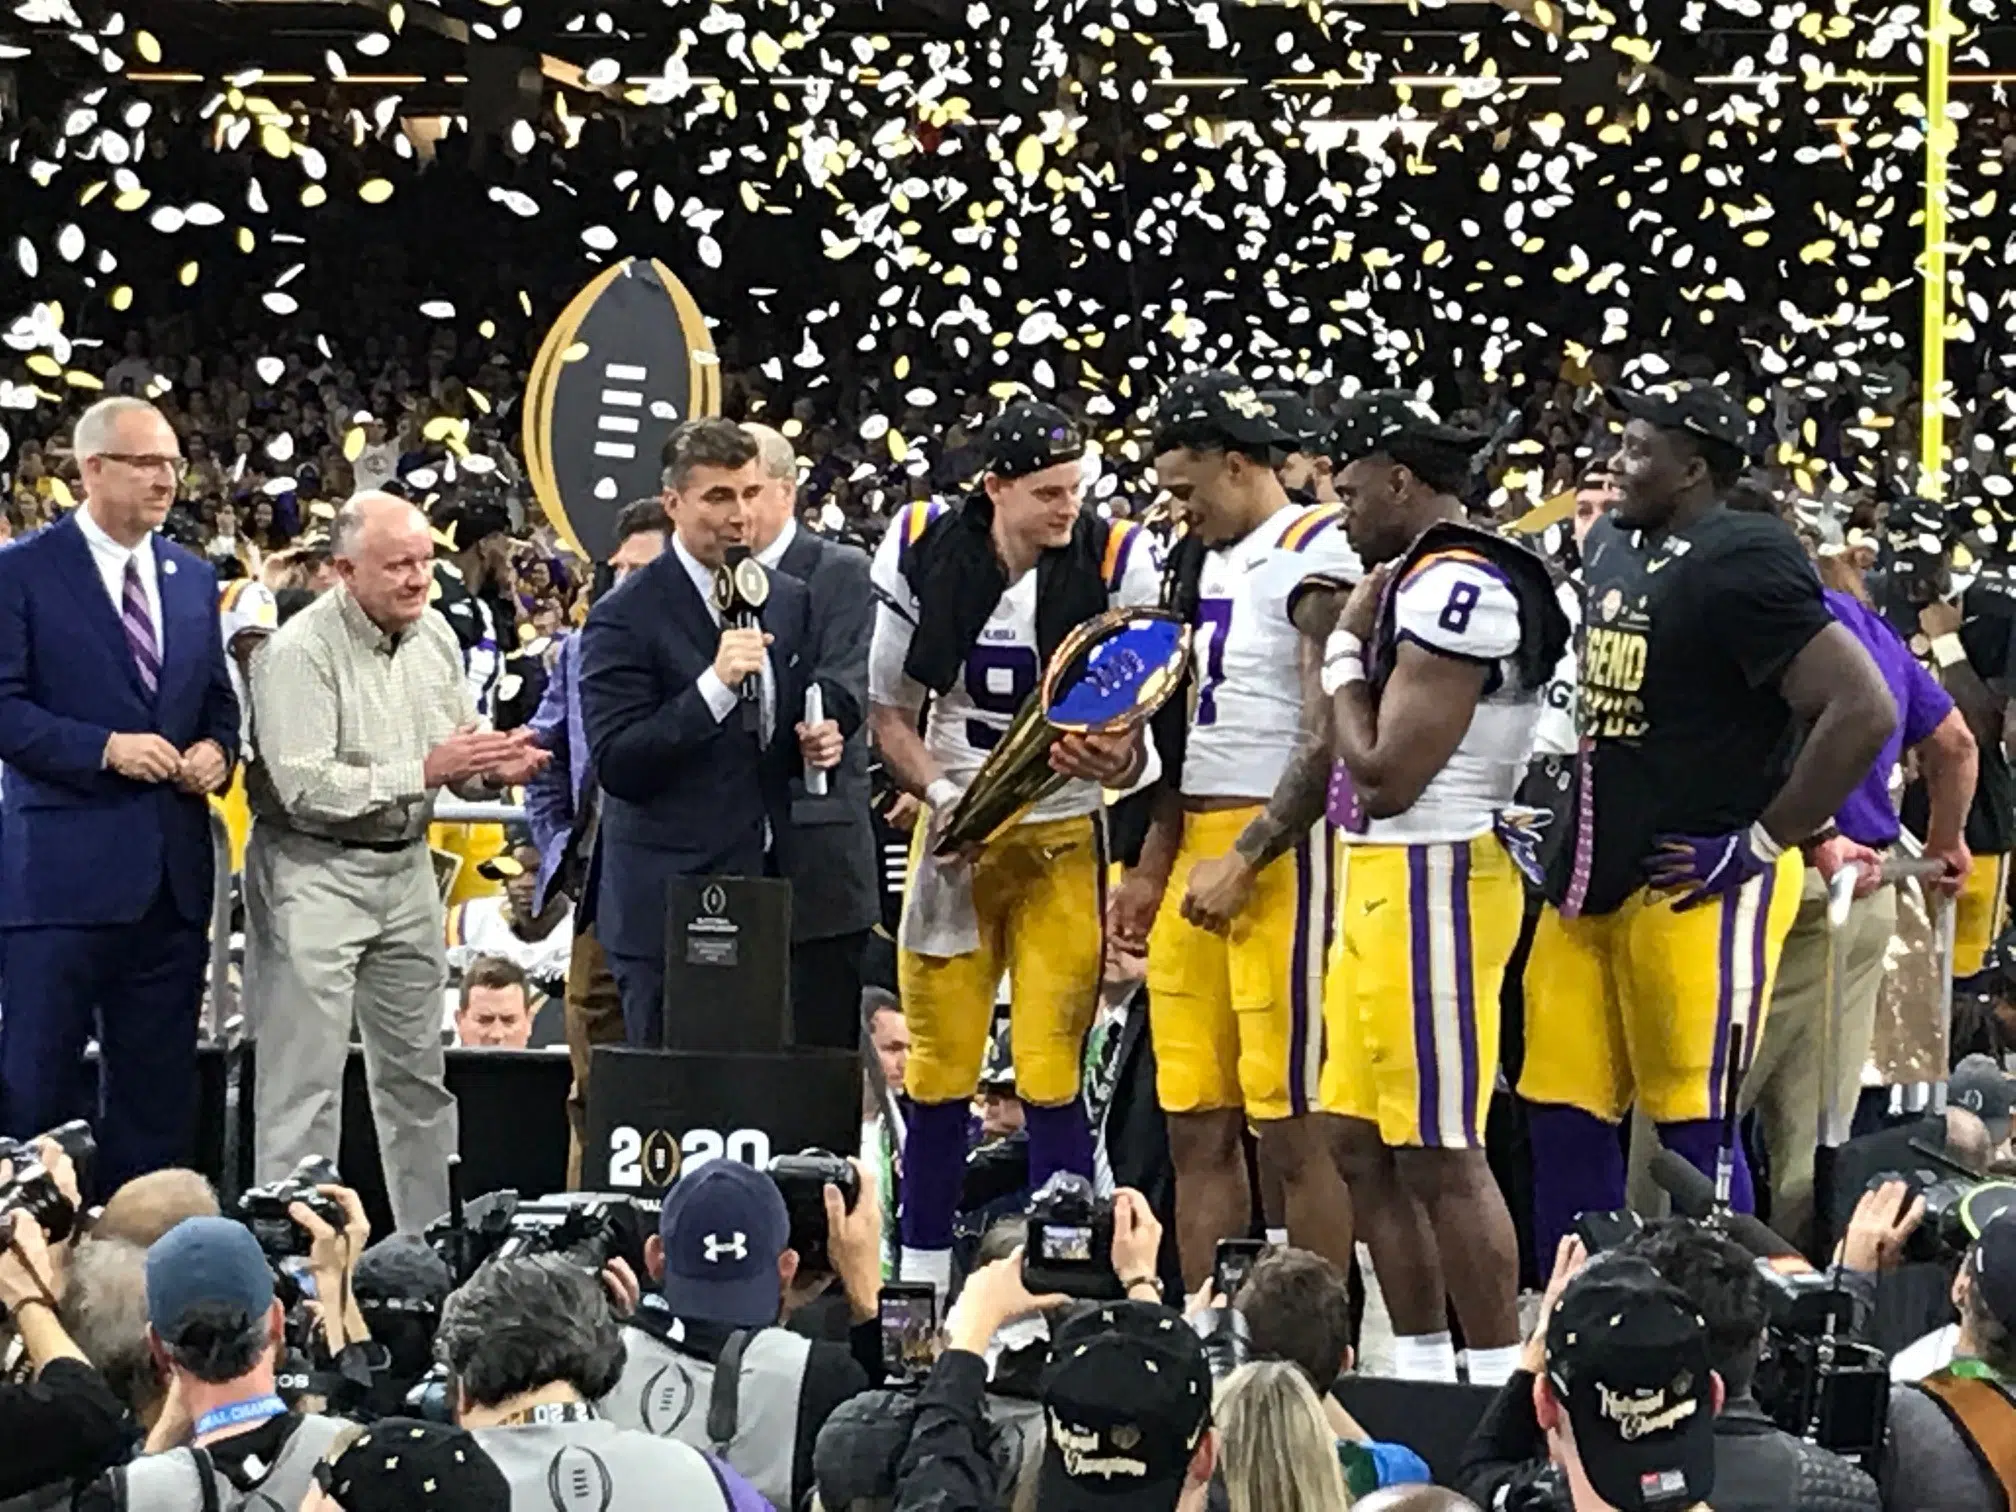 LSU is national champs a perfect 15-0!